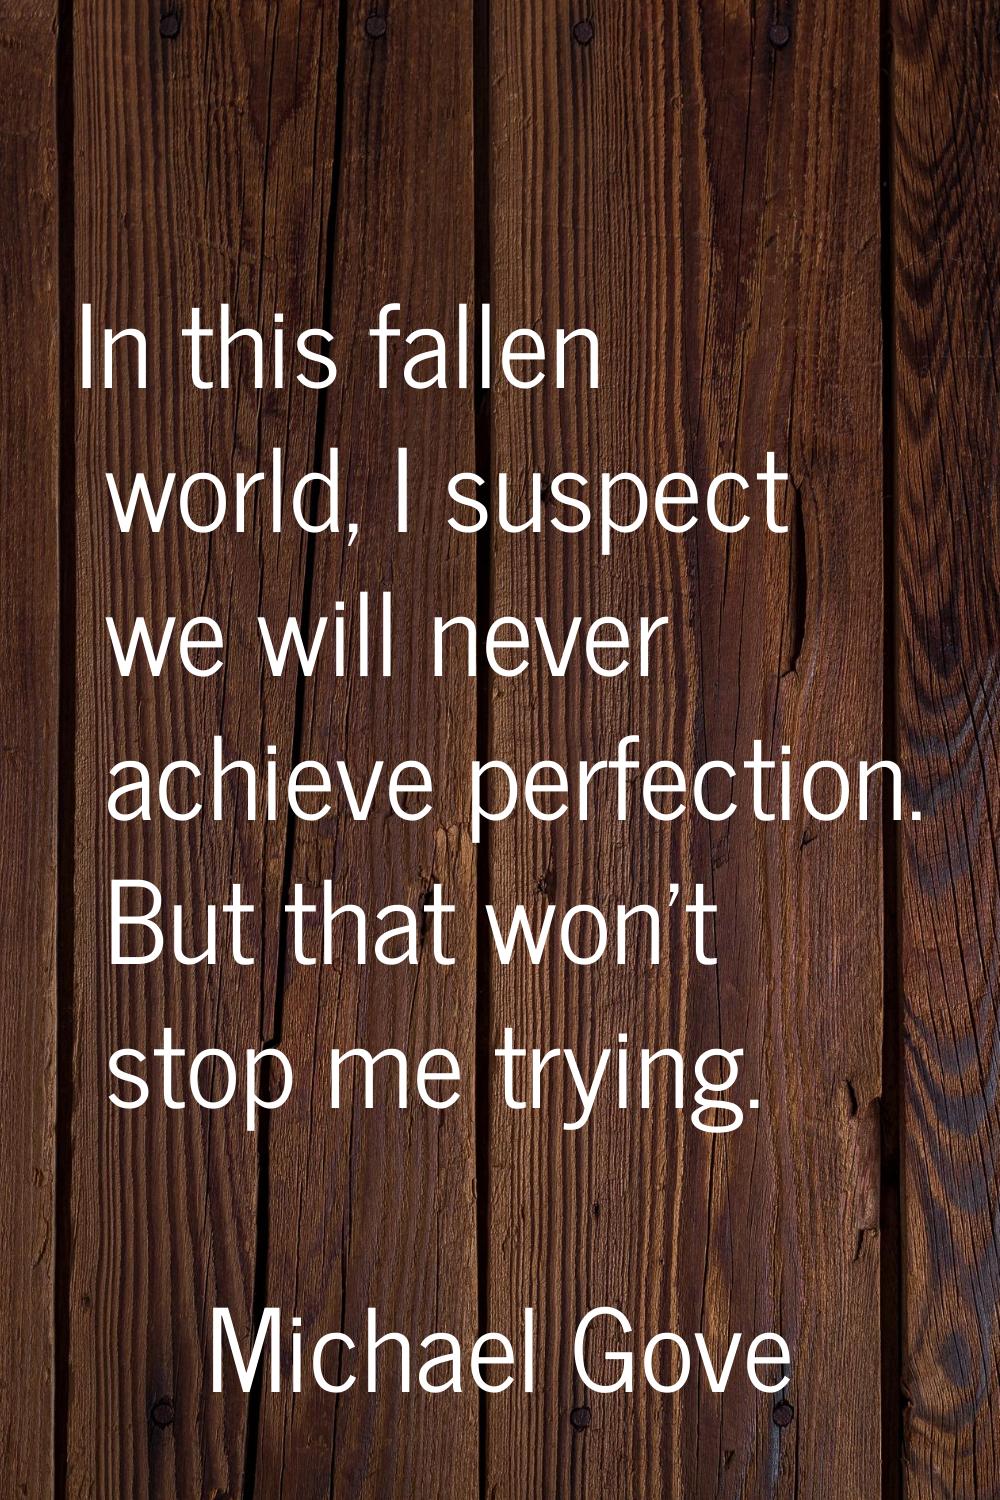 In this fallen world, I suspect we will never achieve perfection. But that won't stop me trying.